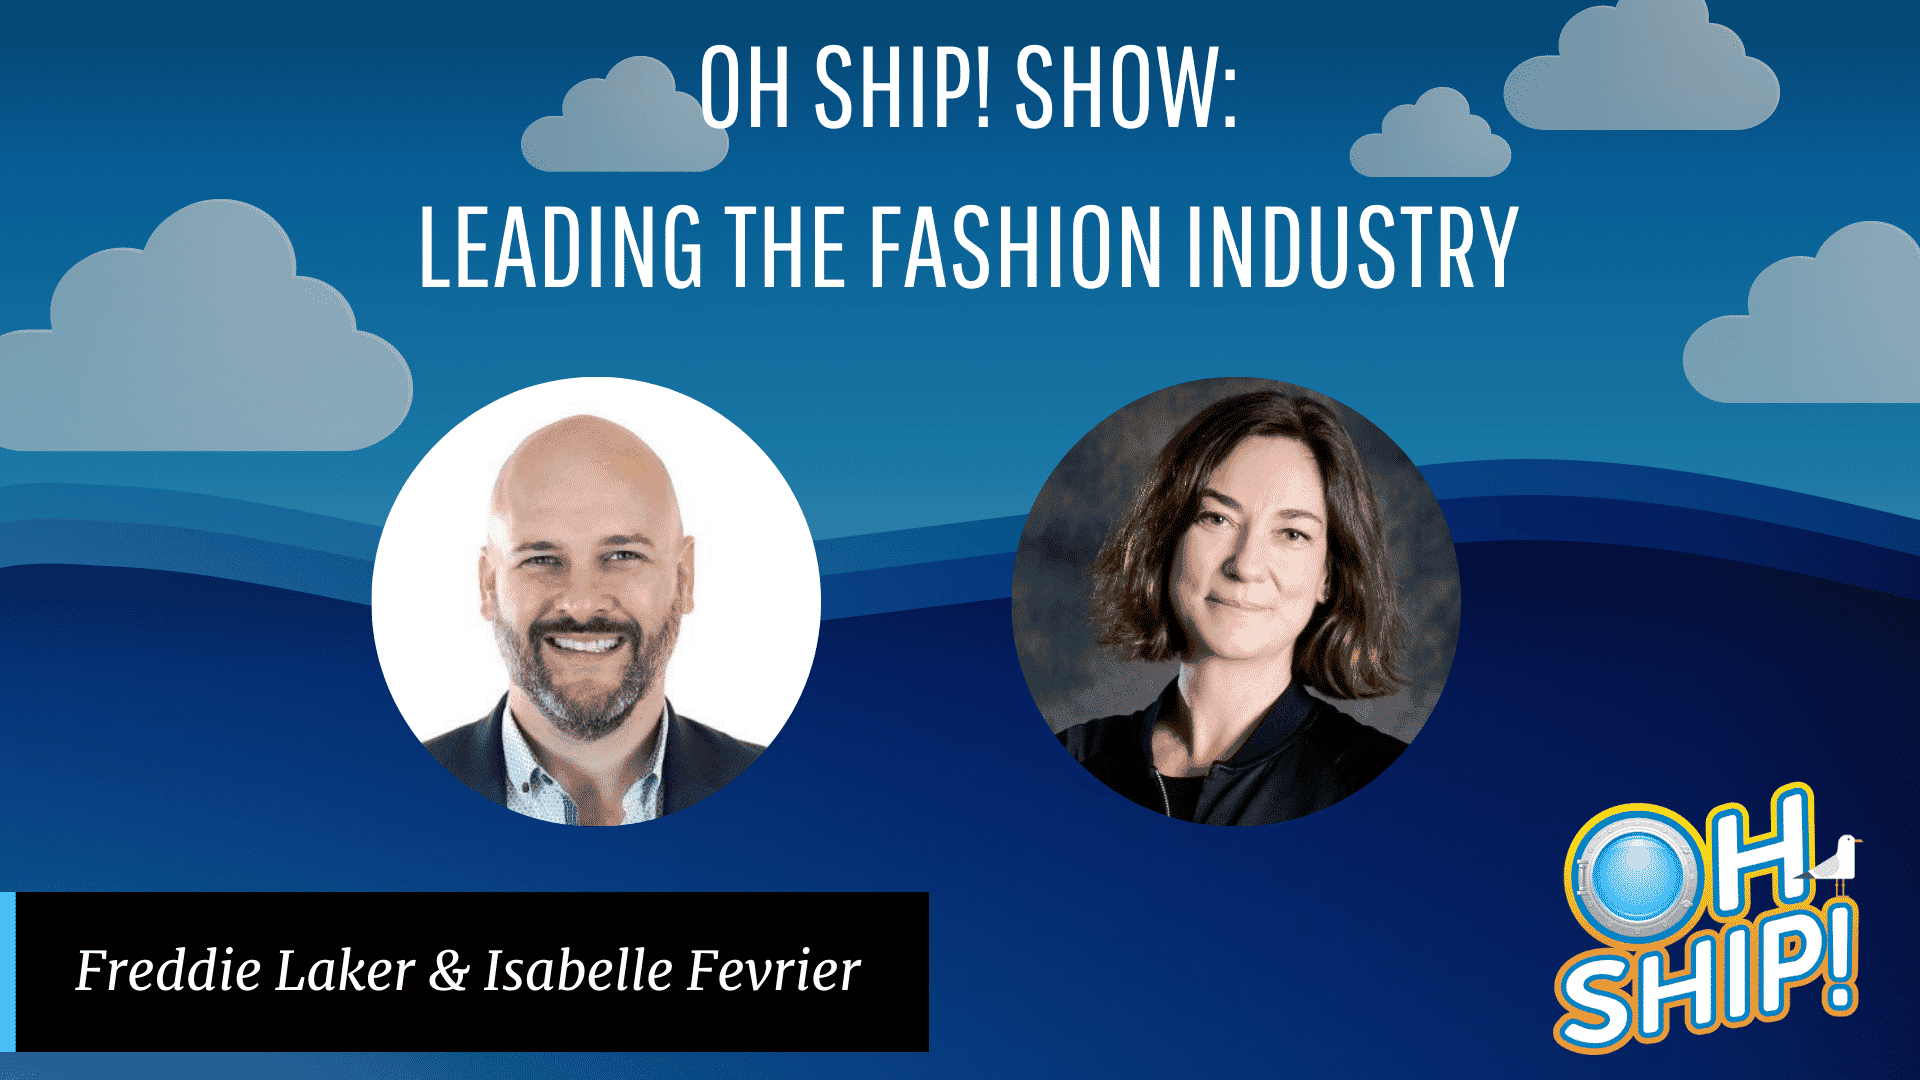 Promotional image for "Oh Ship! Show: Leading the Fashion Industry" featuring headshots of Freddie Laker and Isabelle Fevrier, CEO of Mansur Gavriel, against a blue background with clouds and a ship graphic in the bottom right corner.